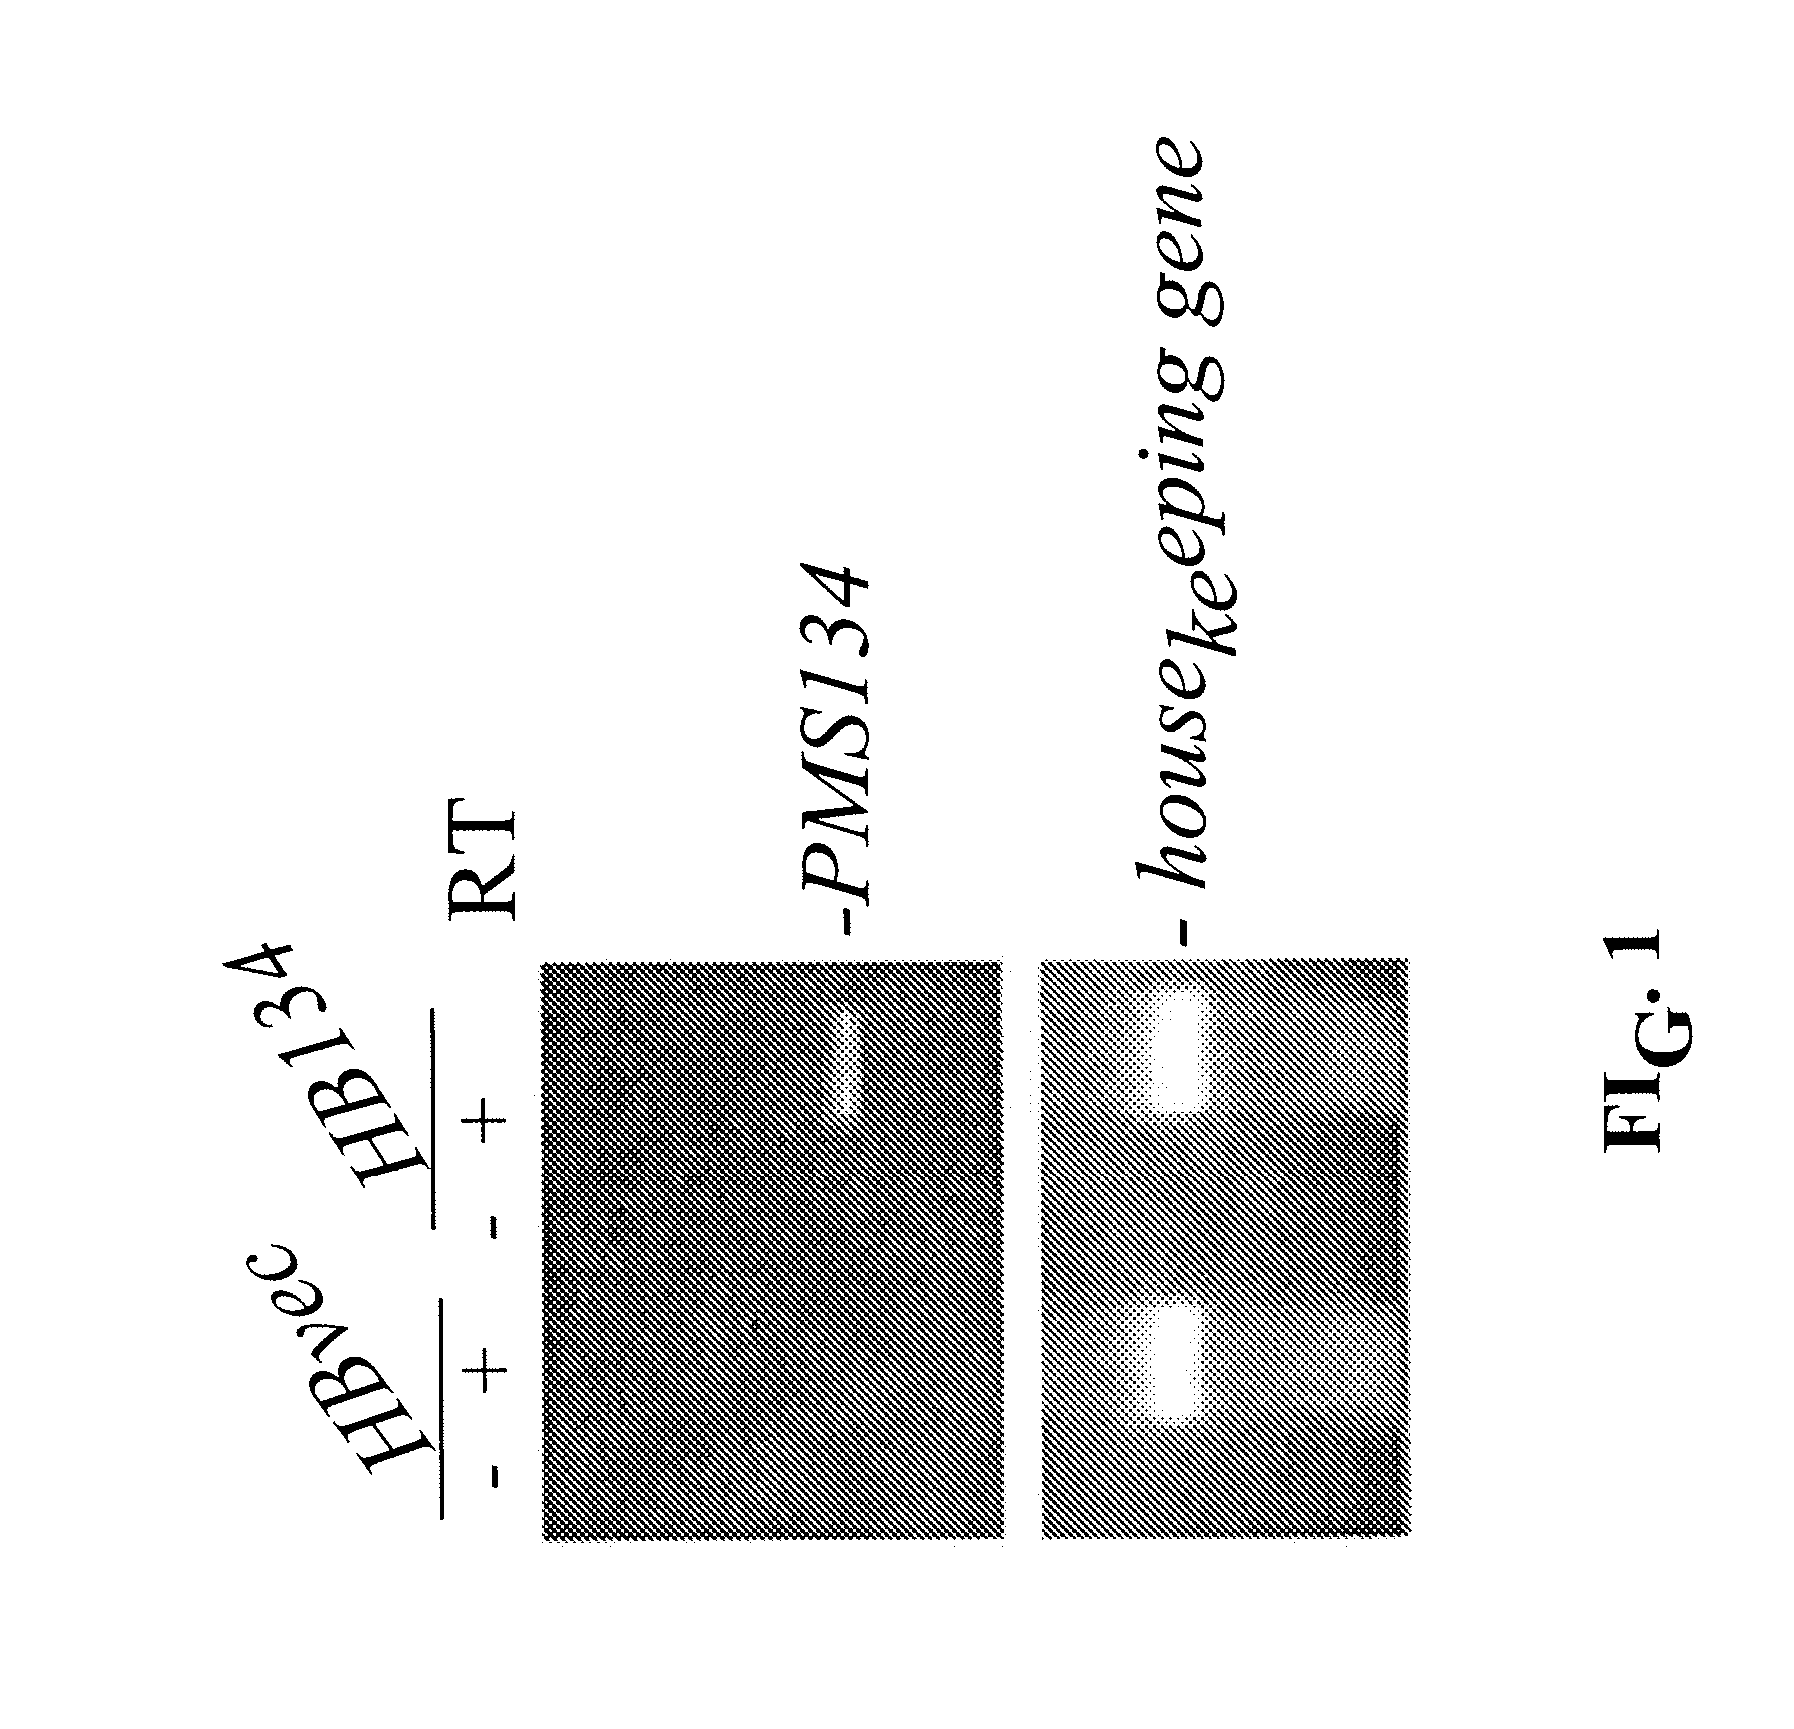 Antibodies And Methods For Generating Genetically Altered Antibodies With High Affinity